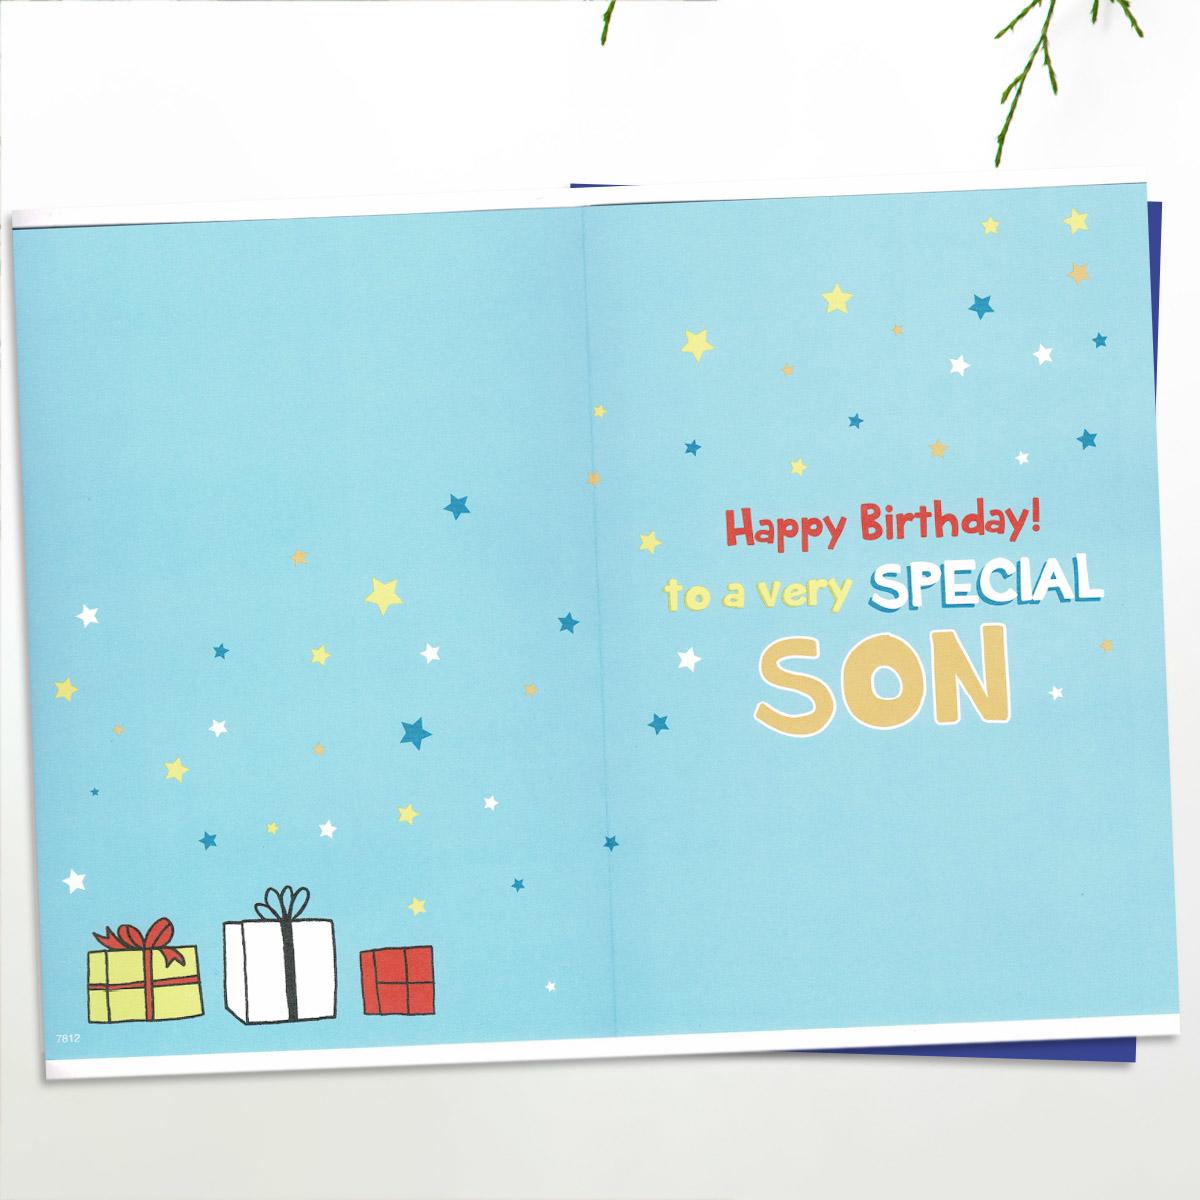 Inside Image Of Son Age 7 Birthday Card Showing Layout And Printed Text